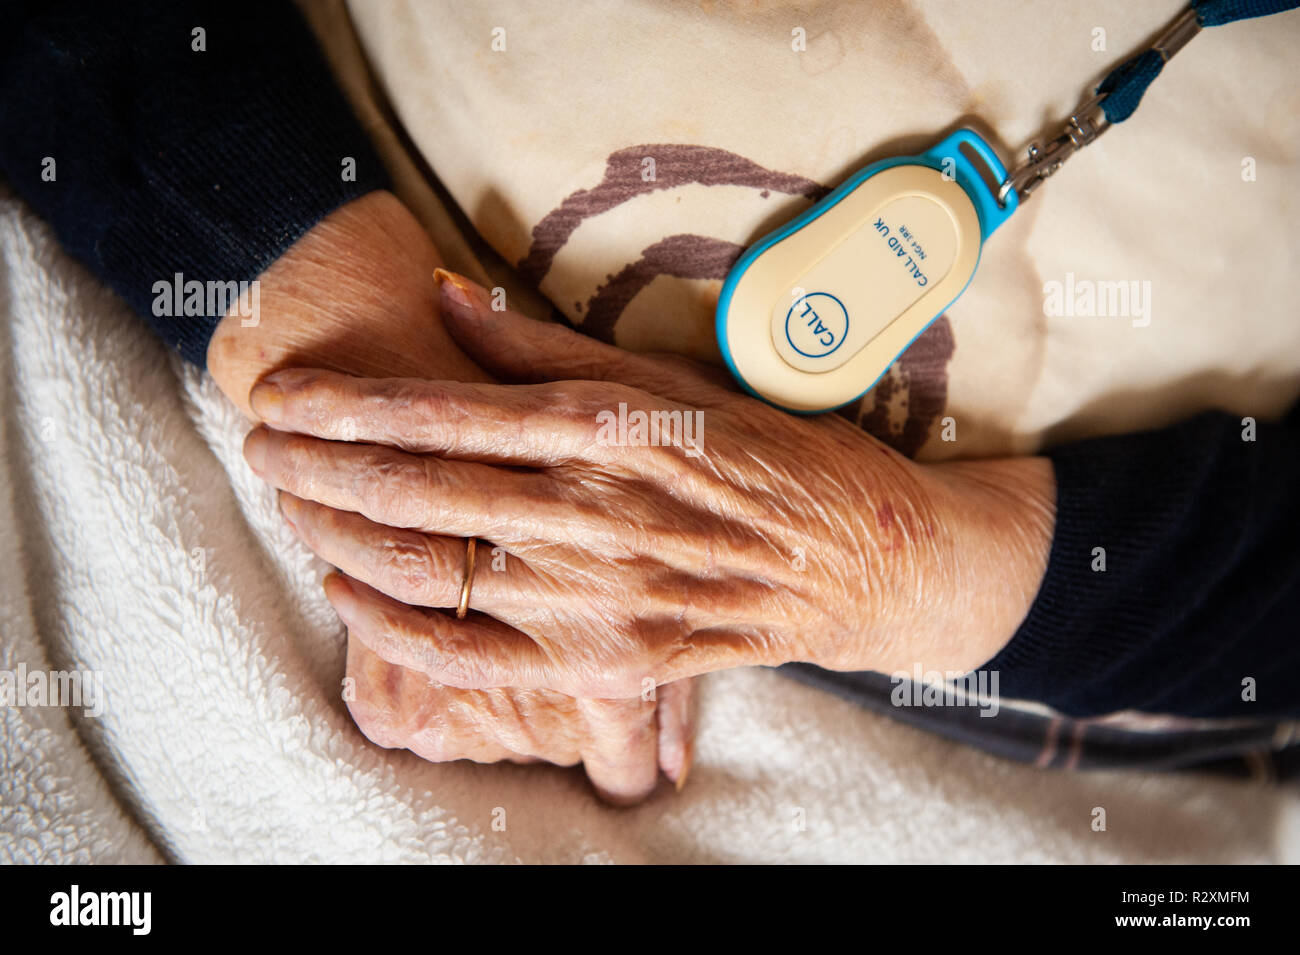 Old lady's hands showing age, alarm button and gold wedding band. Stock Photo